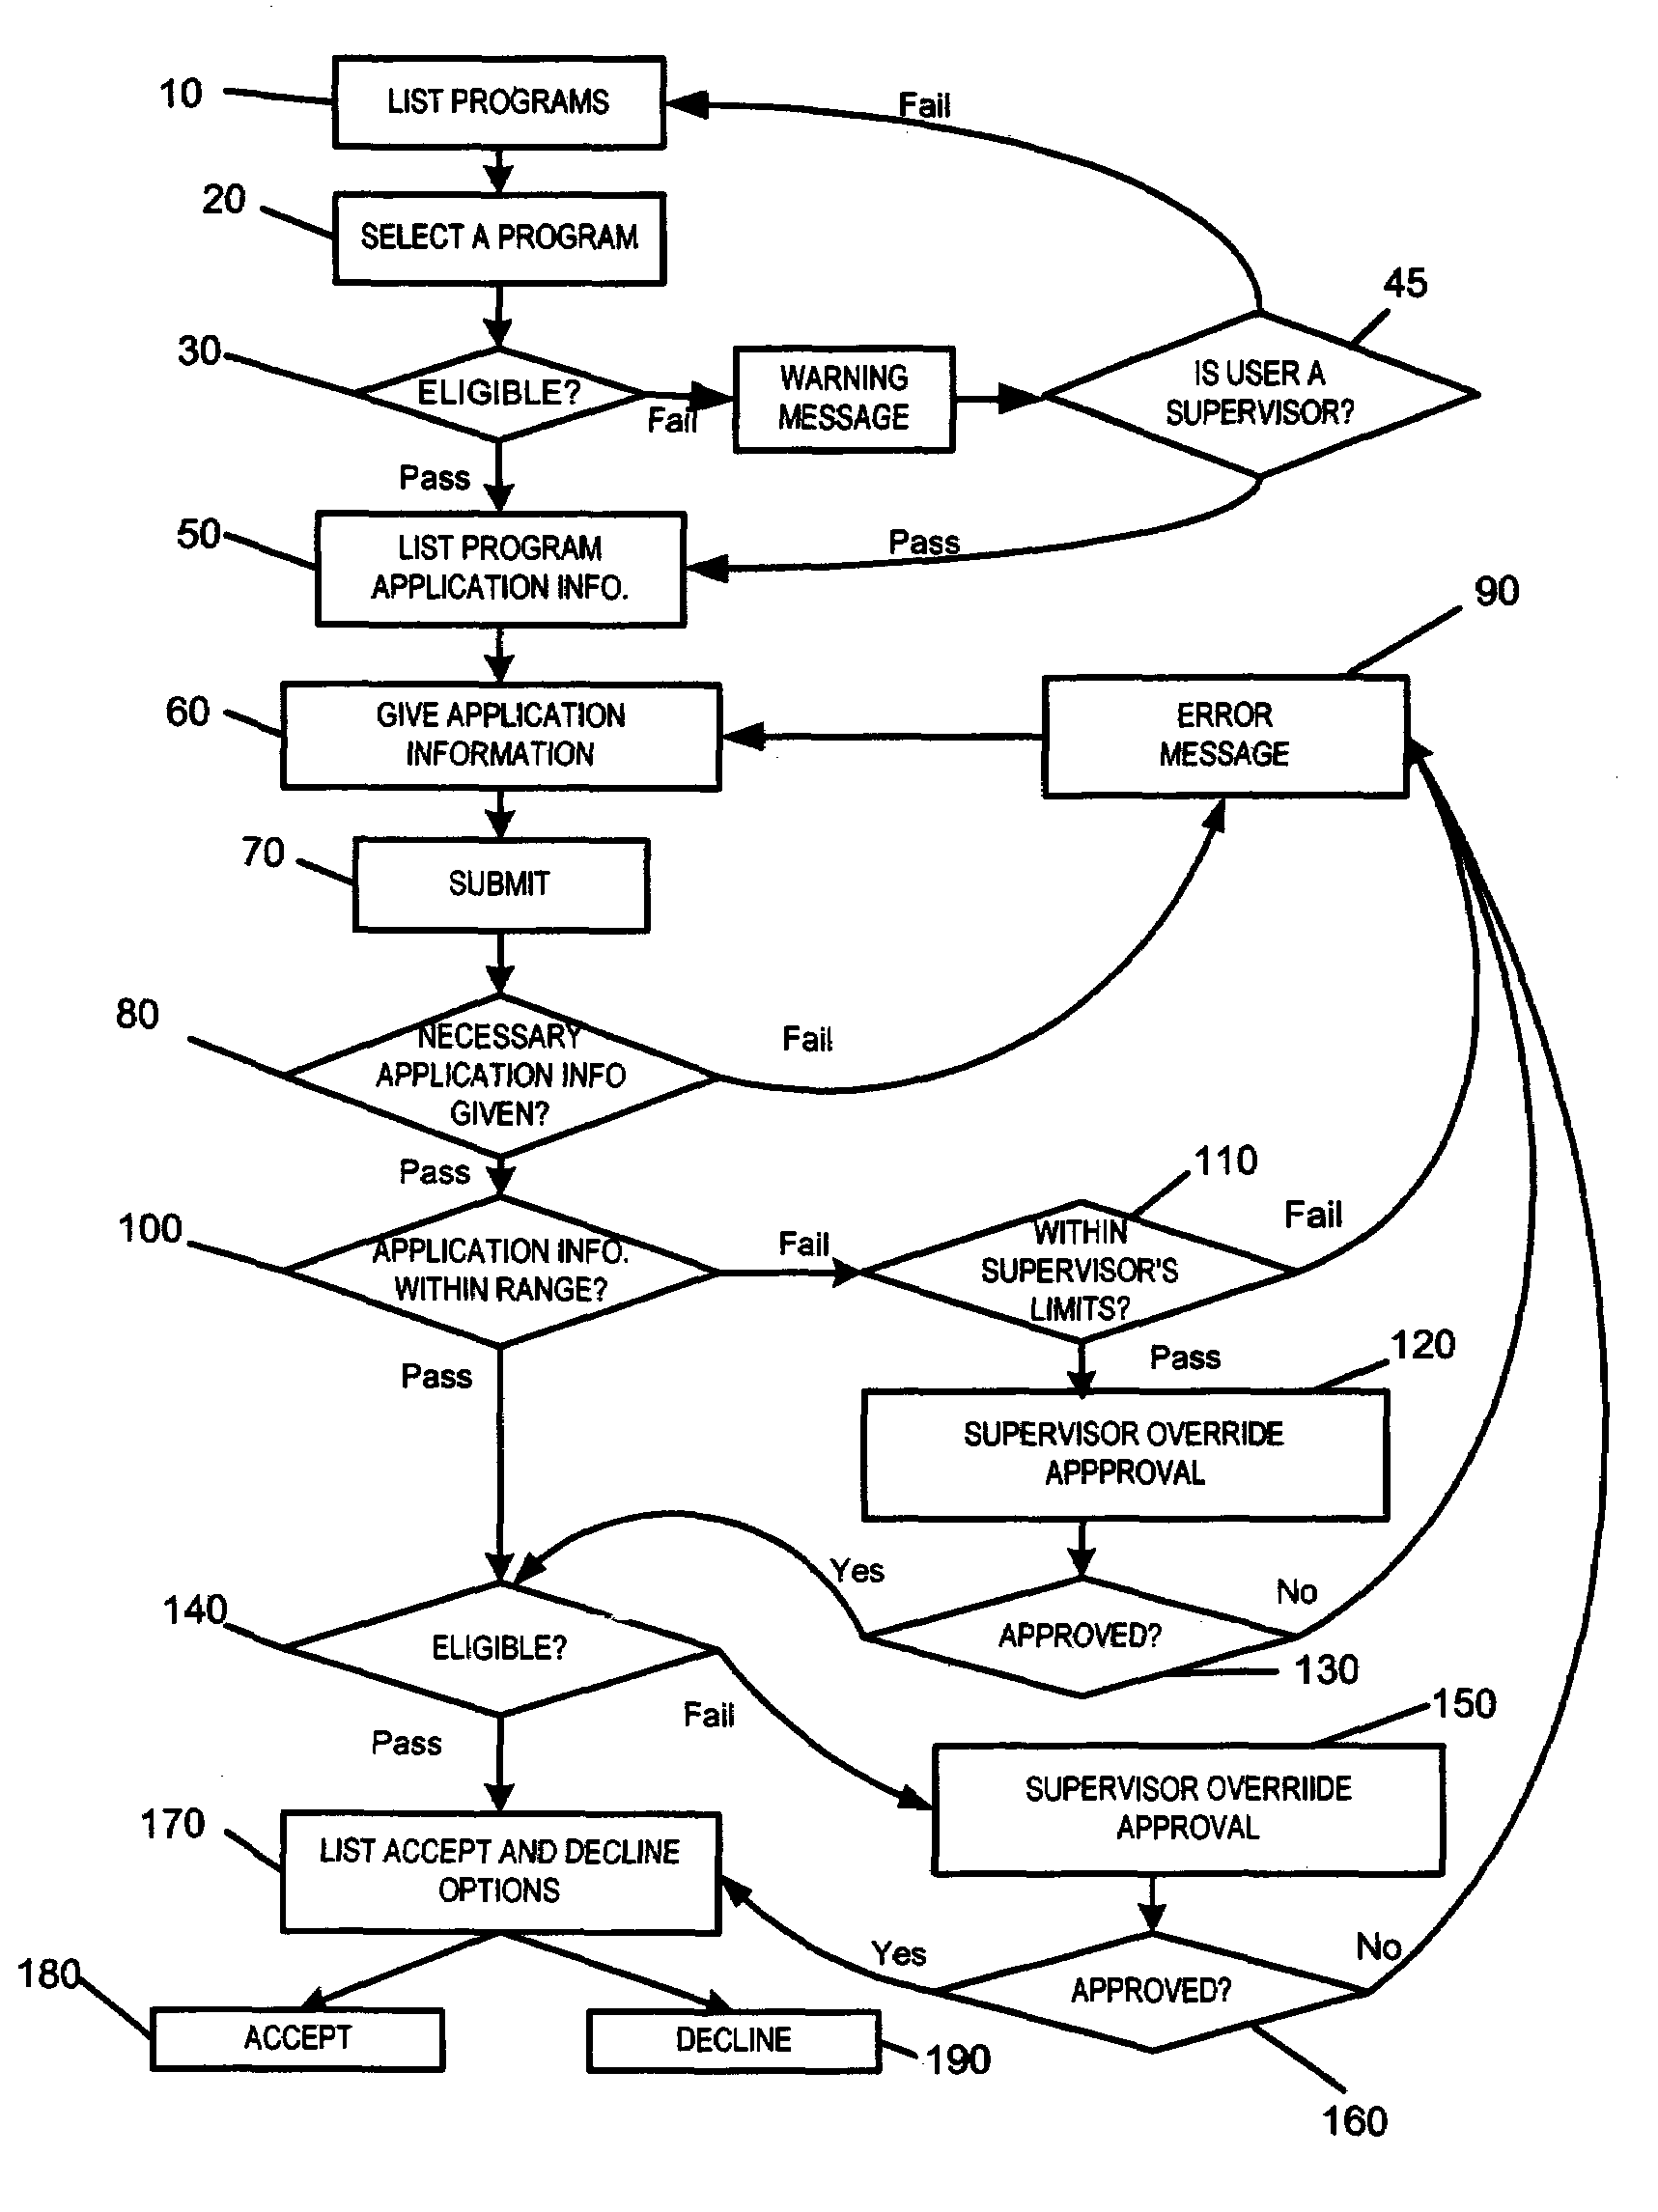 System and method for determining eligibility and enrolling members in various programs